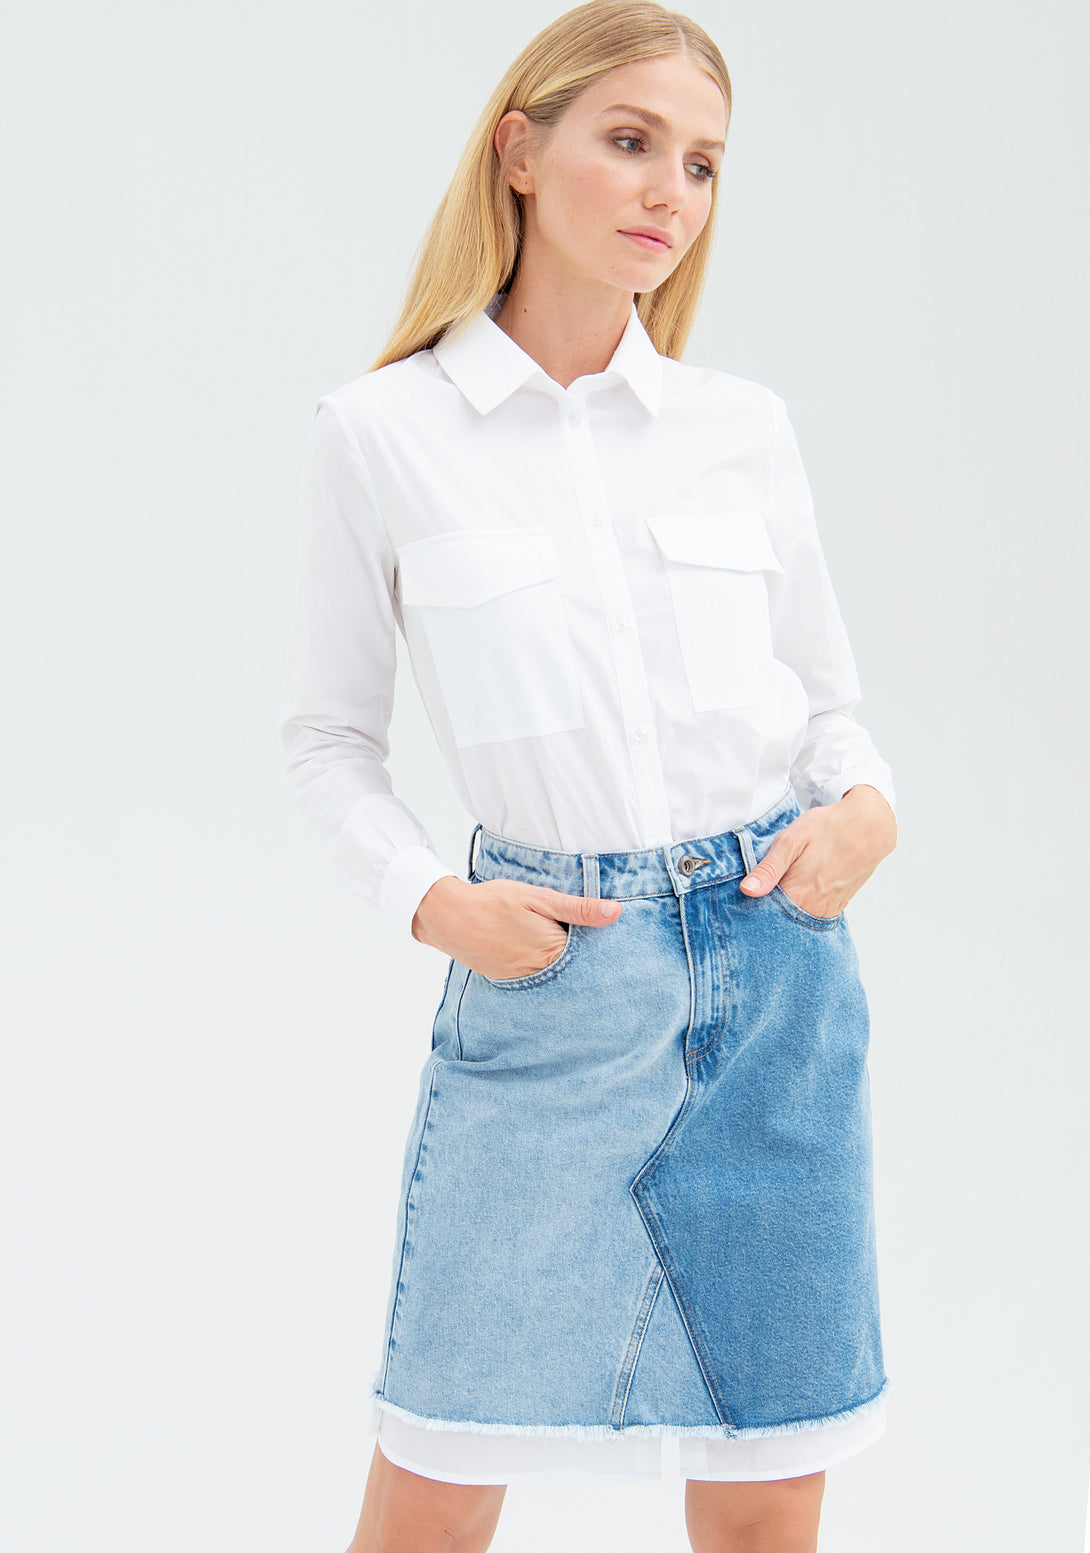 Mini skirt slim fit made in denim with middle wash